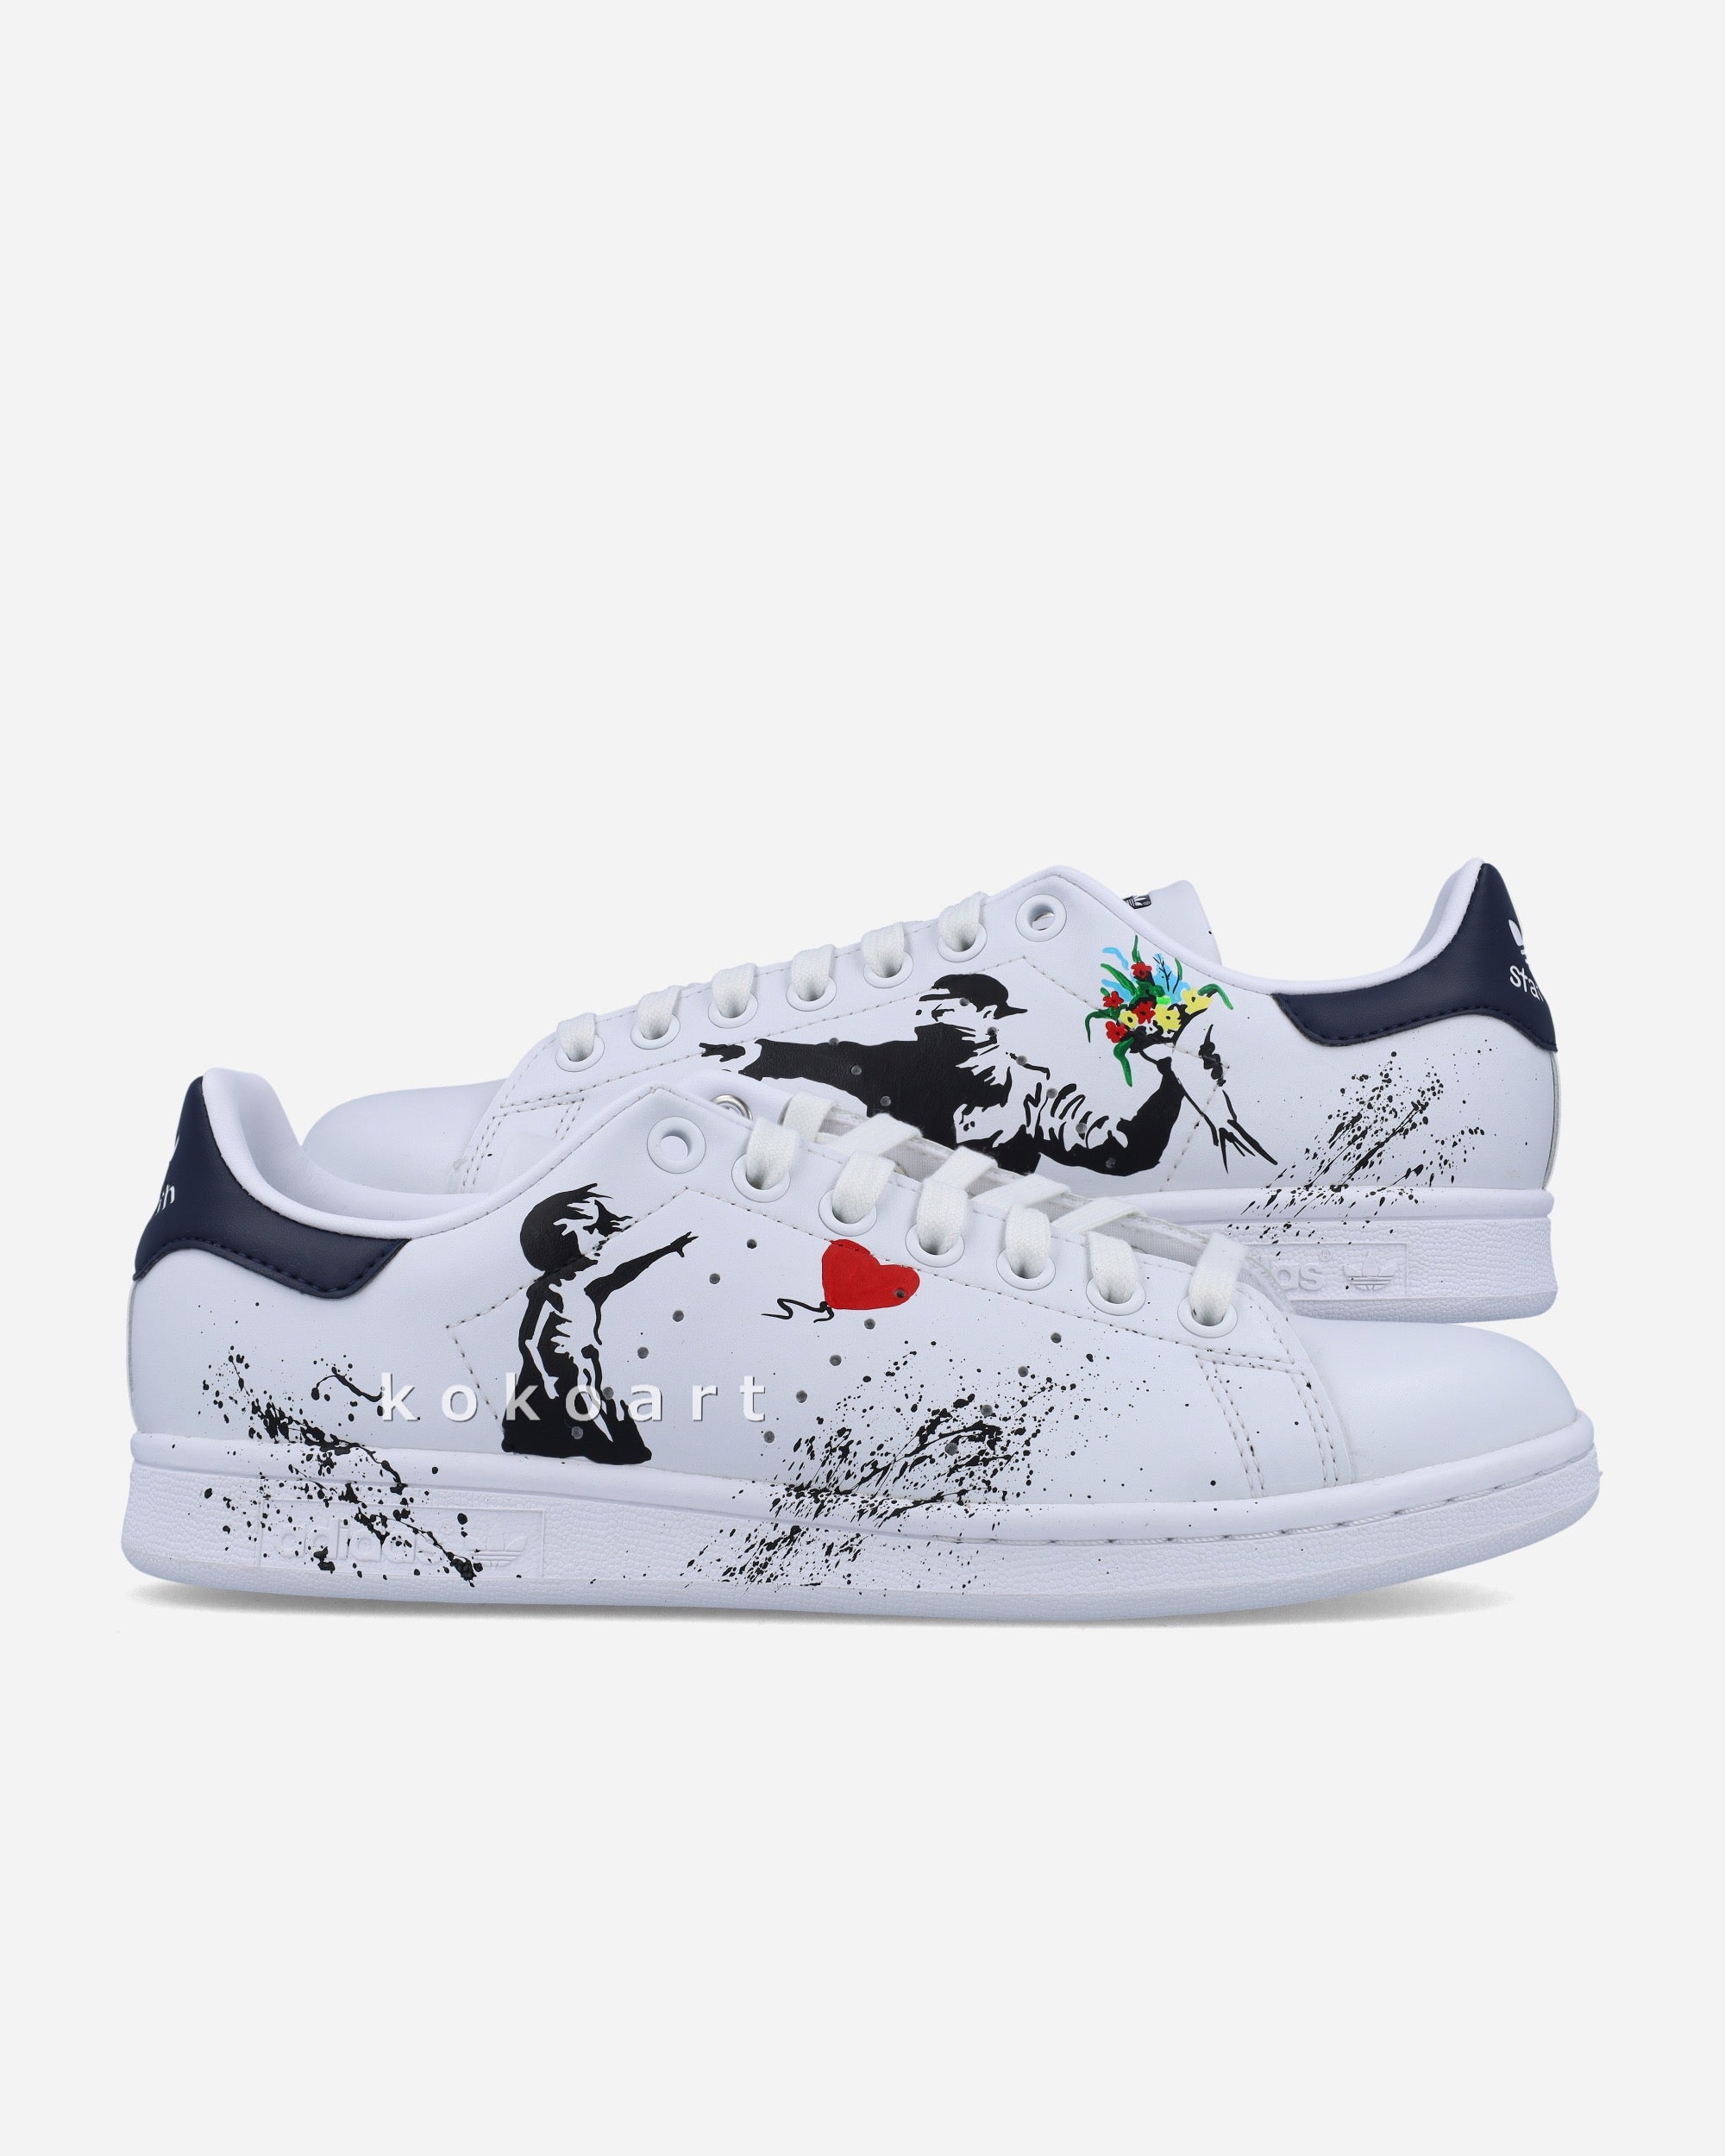 Stan Smith Hand Painted Bansky